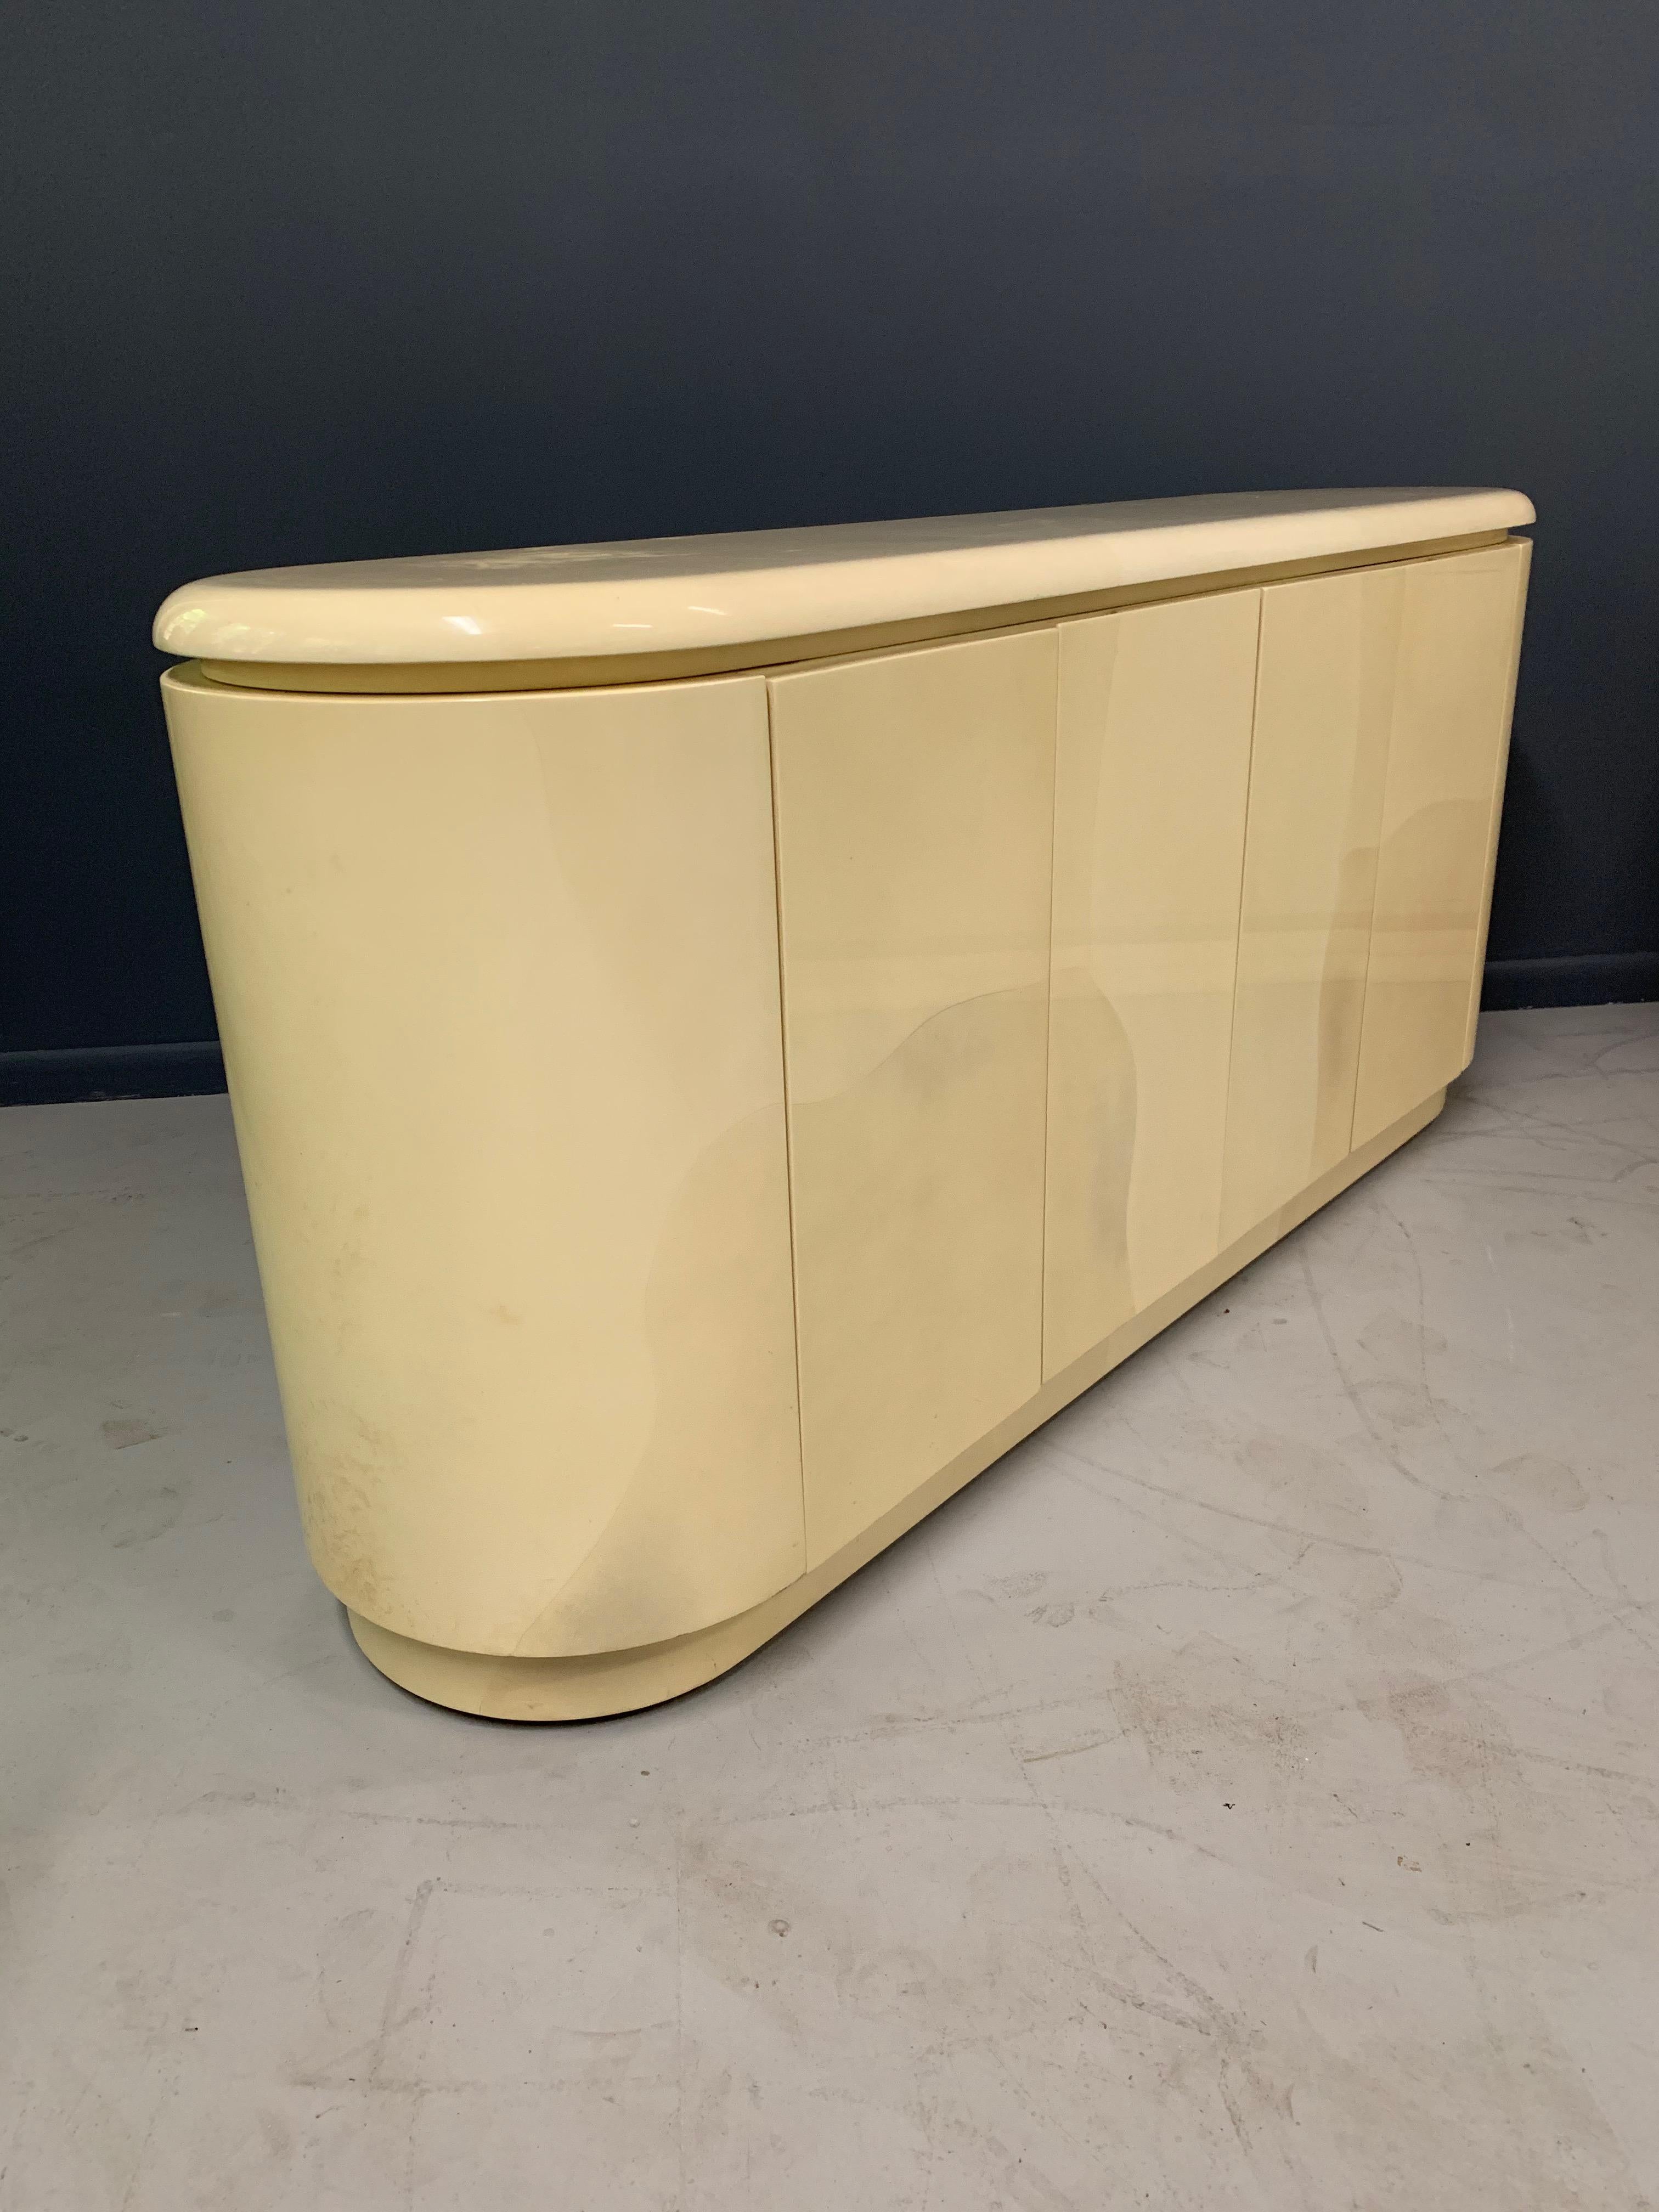 European Lacquered Faux Goatskin Sideboard in the Style of Springer Midcentury